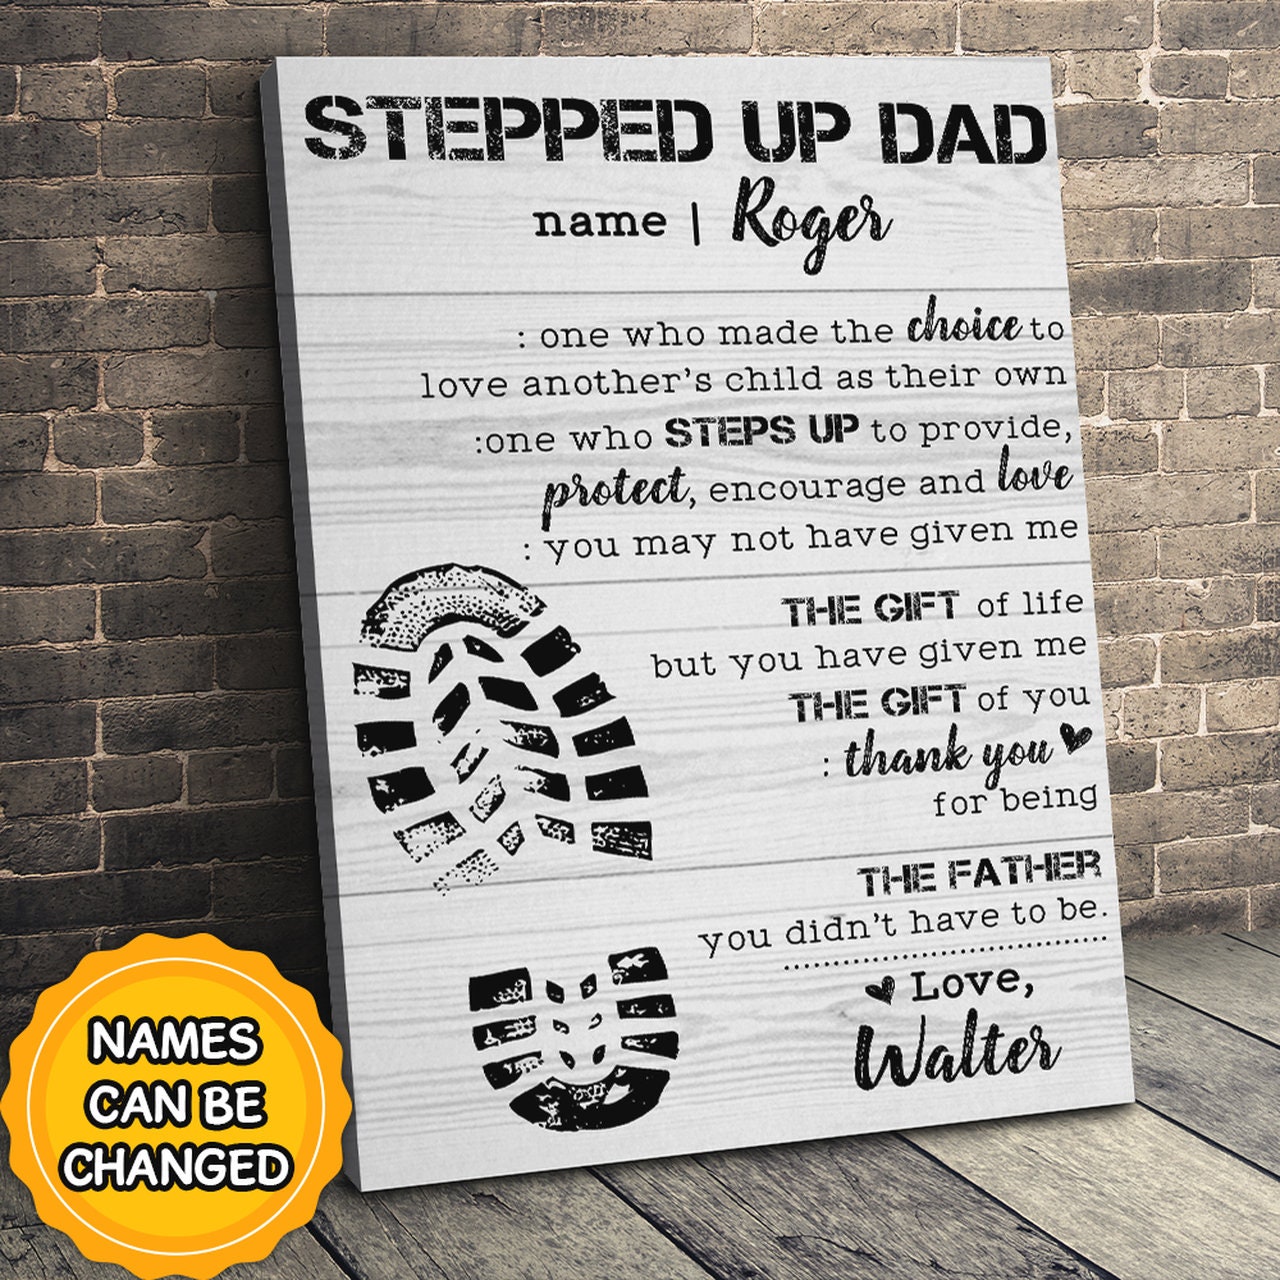 Stepped Up Dad Canvas Gift For Stepdad With Your Name Can Be Personalized